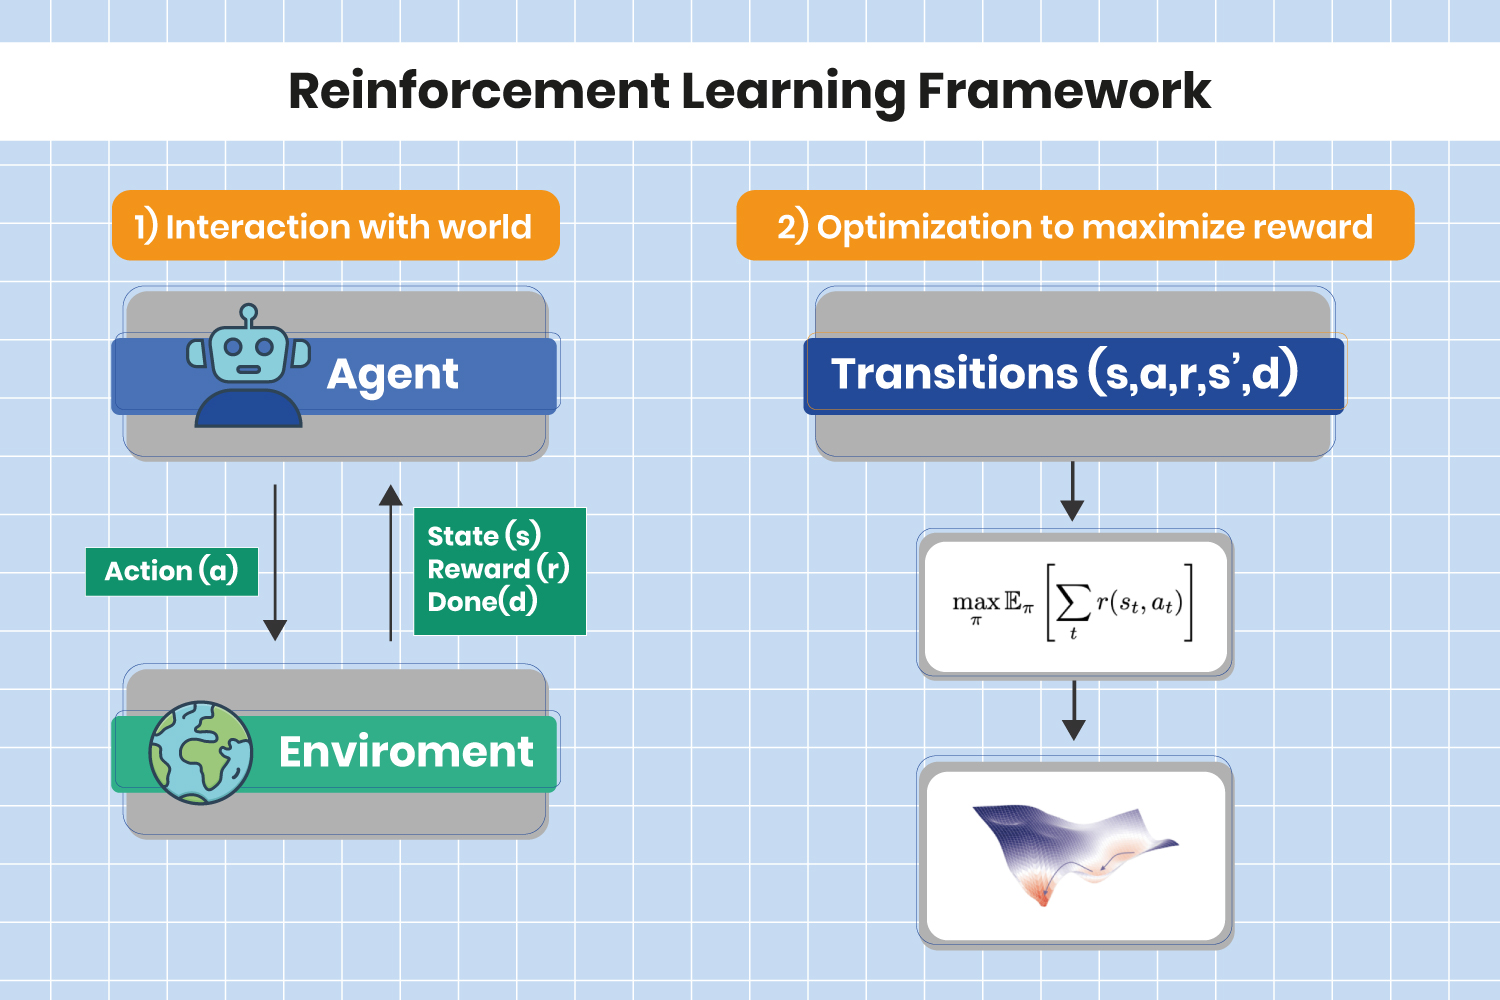 The reinforcement learning framework Anyscale